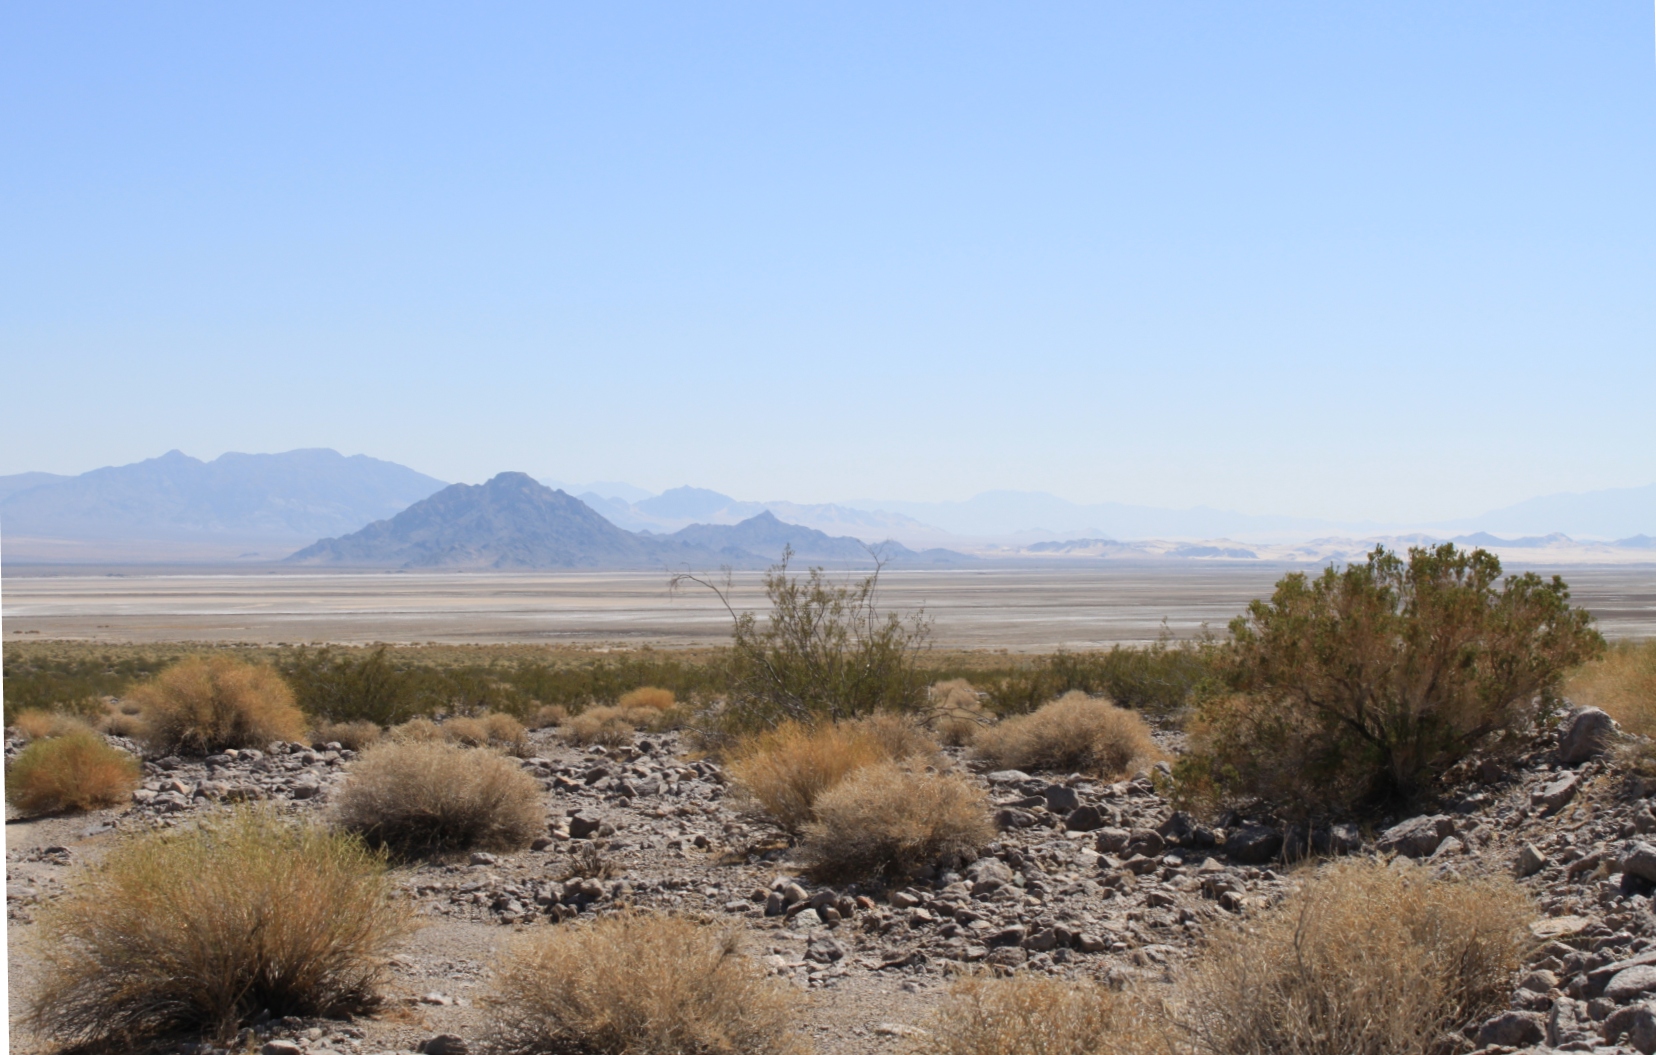 Barstow road trip part 2: Zzyzx Road and the Mojave National Preserve ...